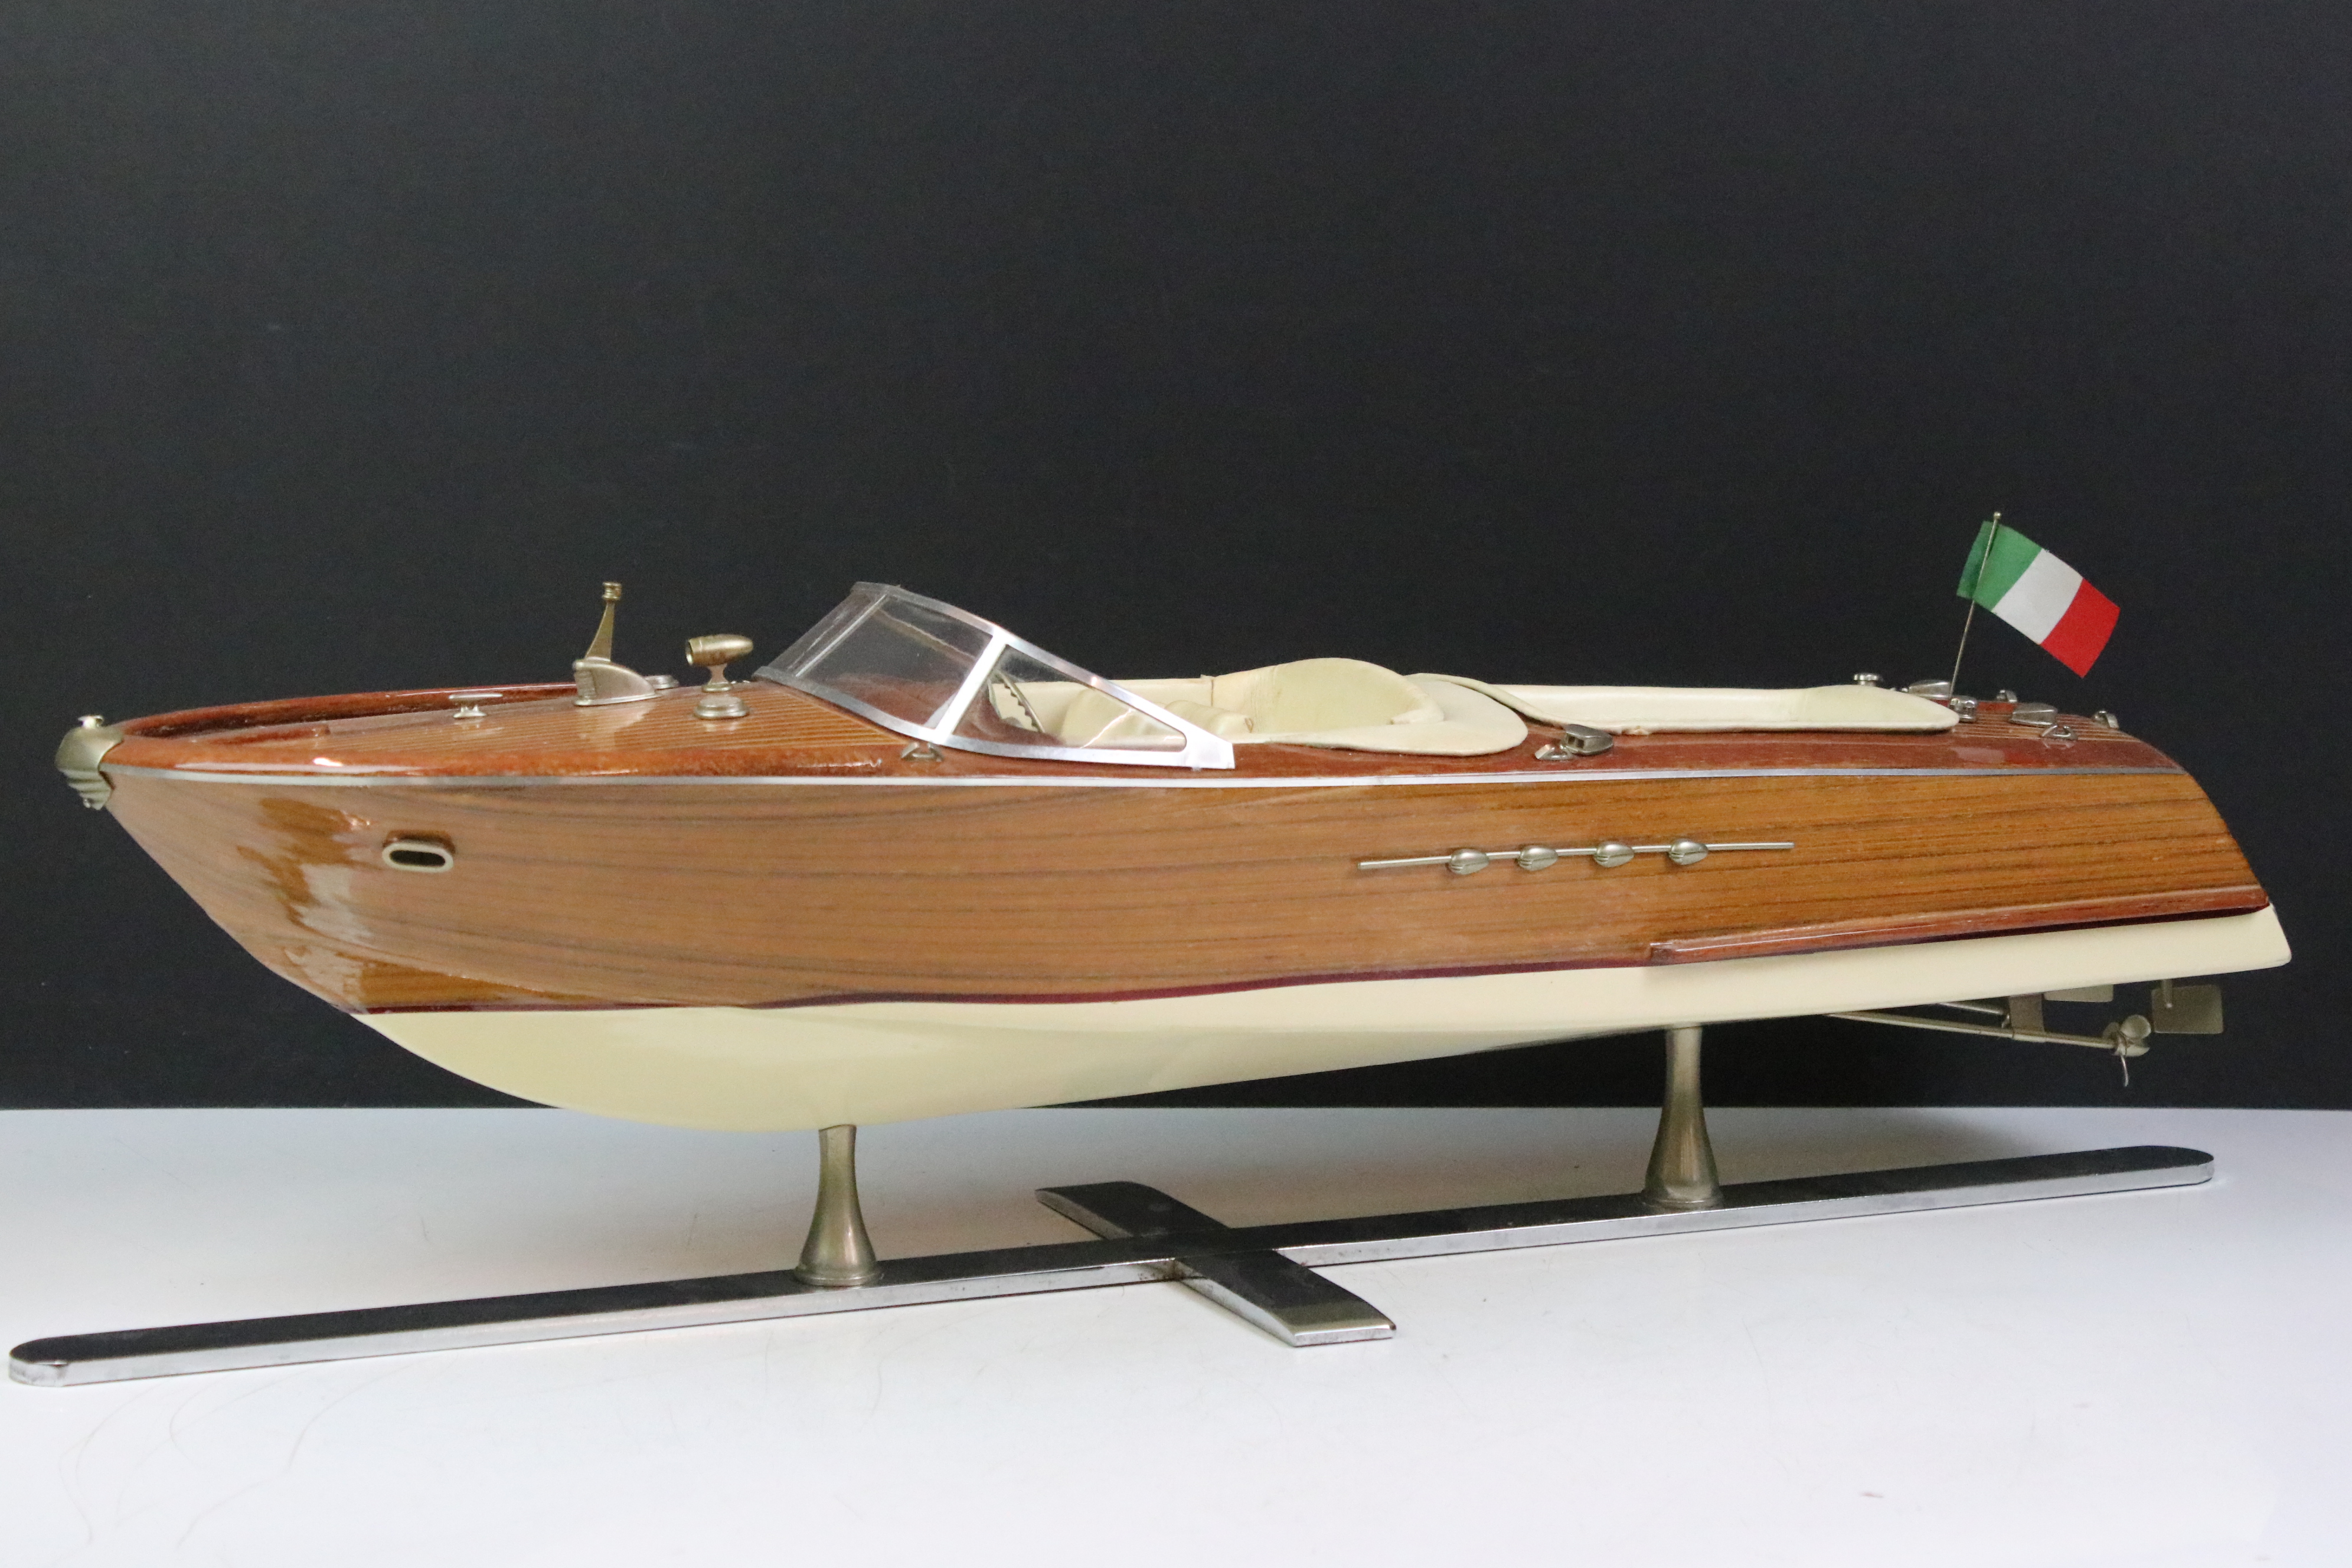 Authentic Models AM Aquarama Italian runabout model boat, on stand, 26" in length - Image 2 of 9